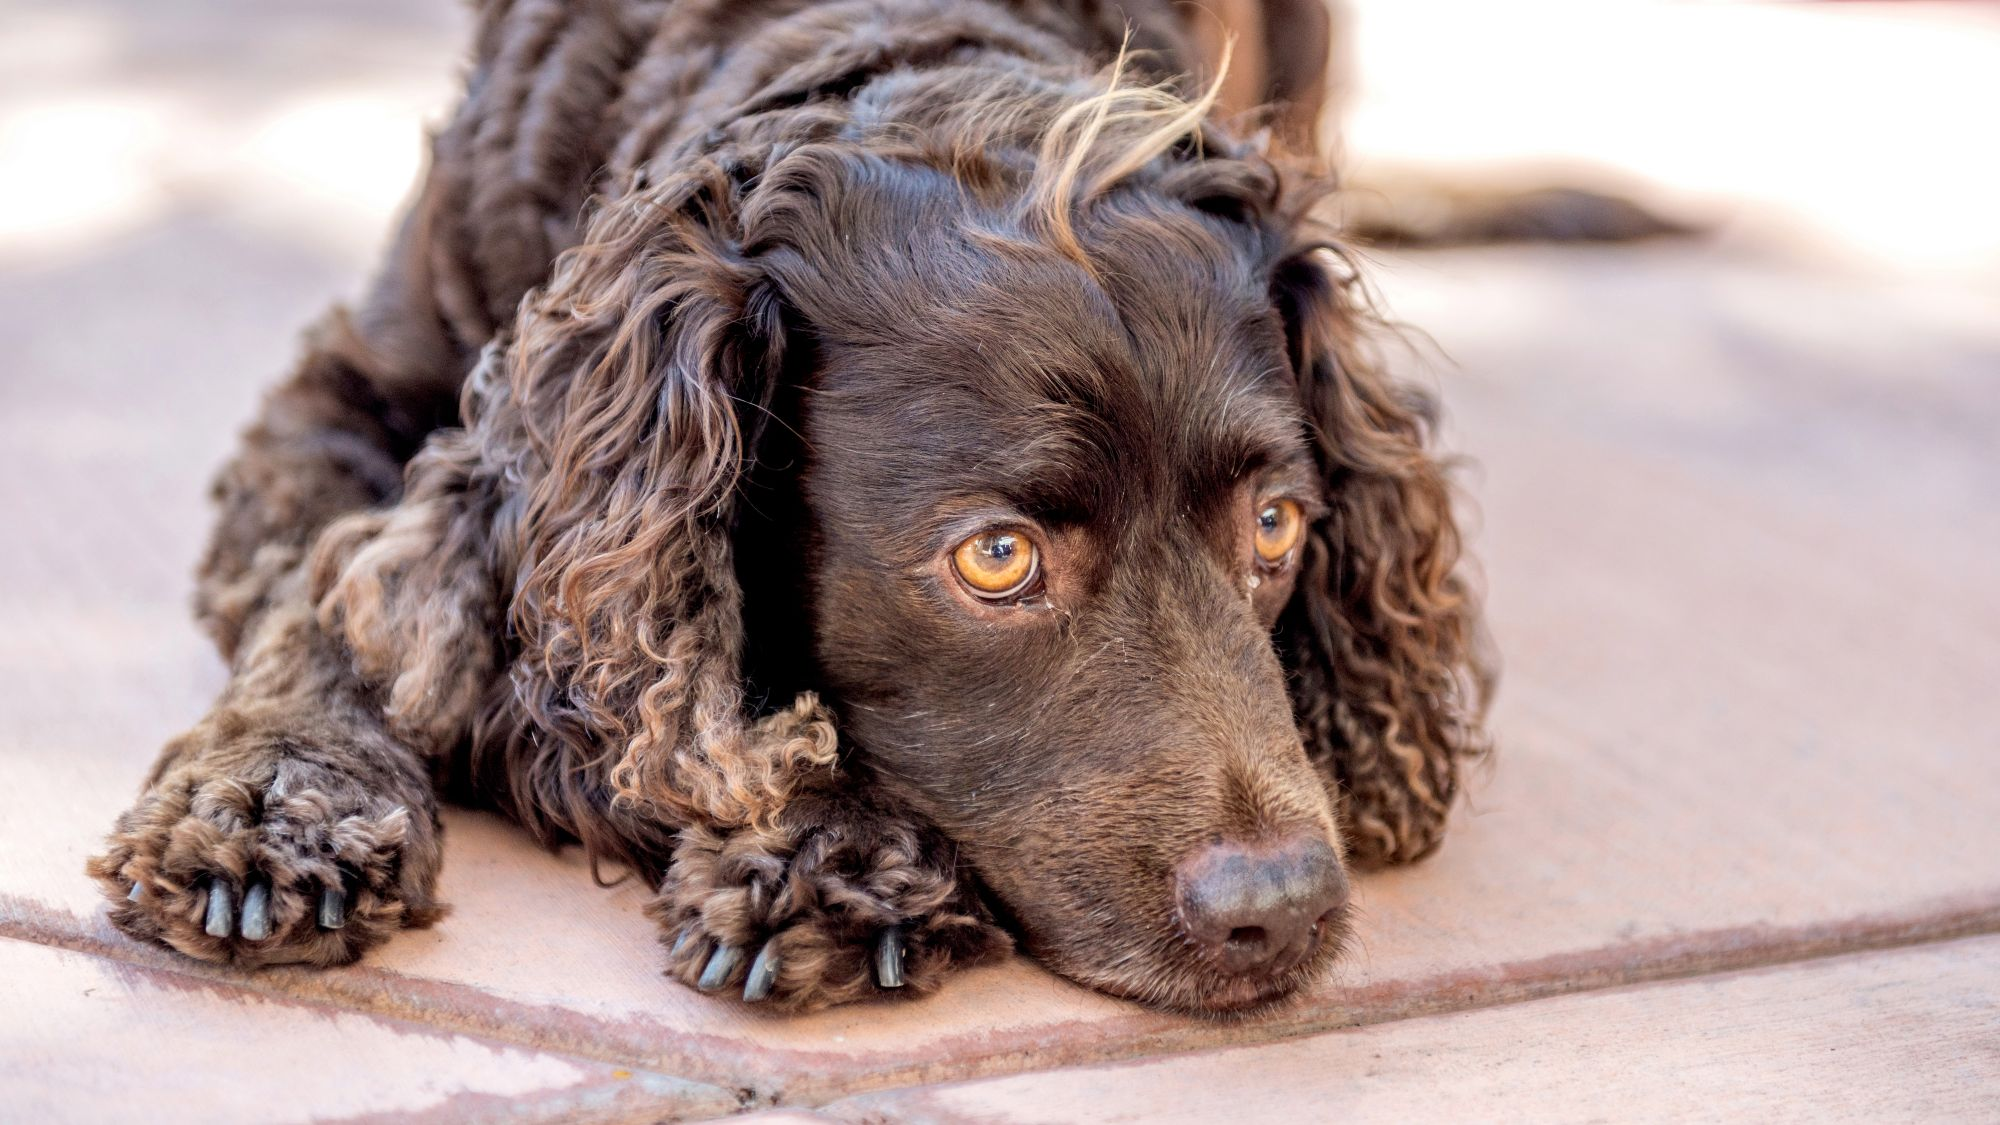 Chocolate brown American Water Spaniel laying head on paws